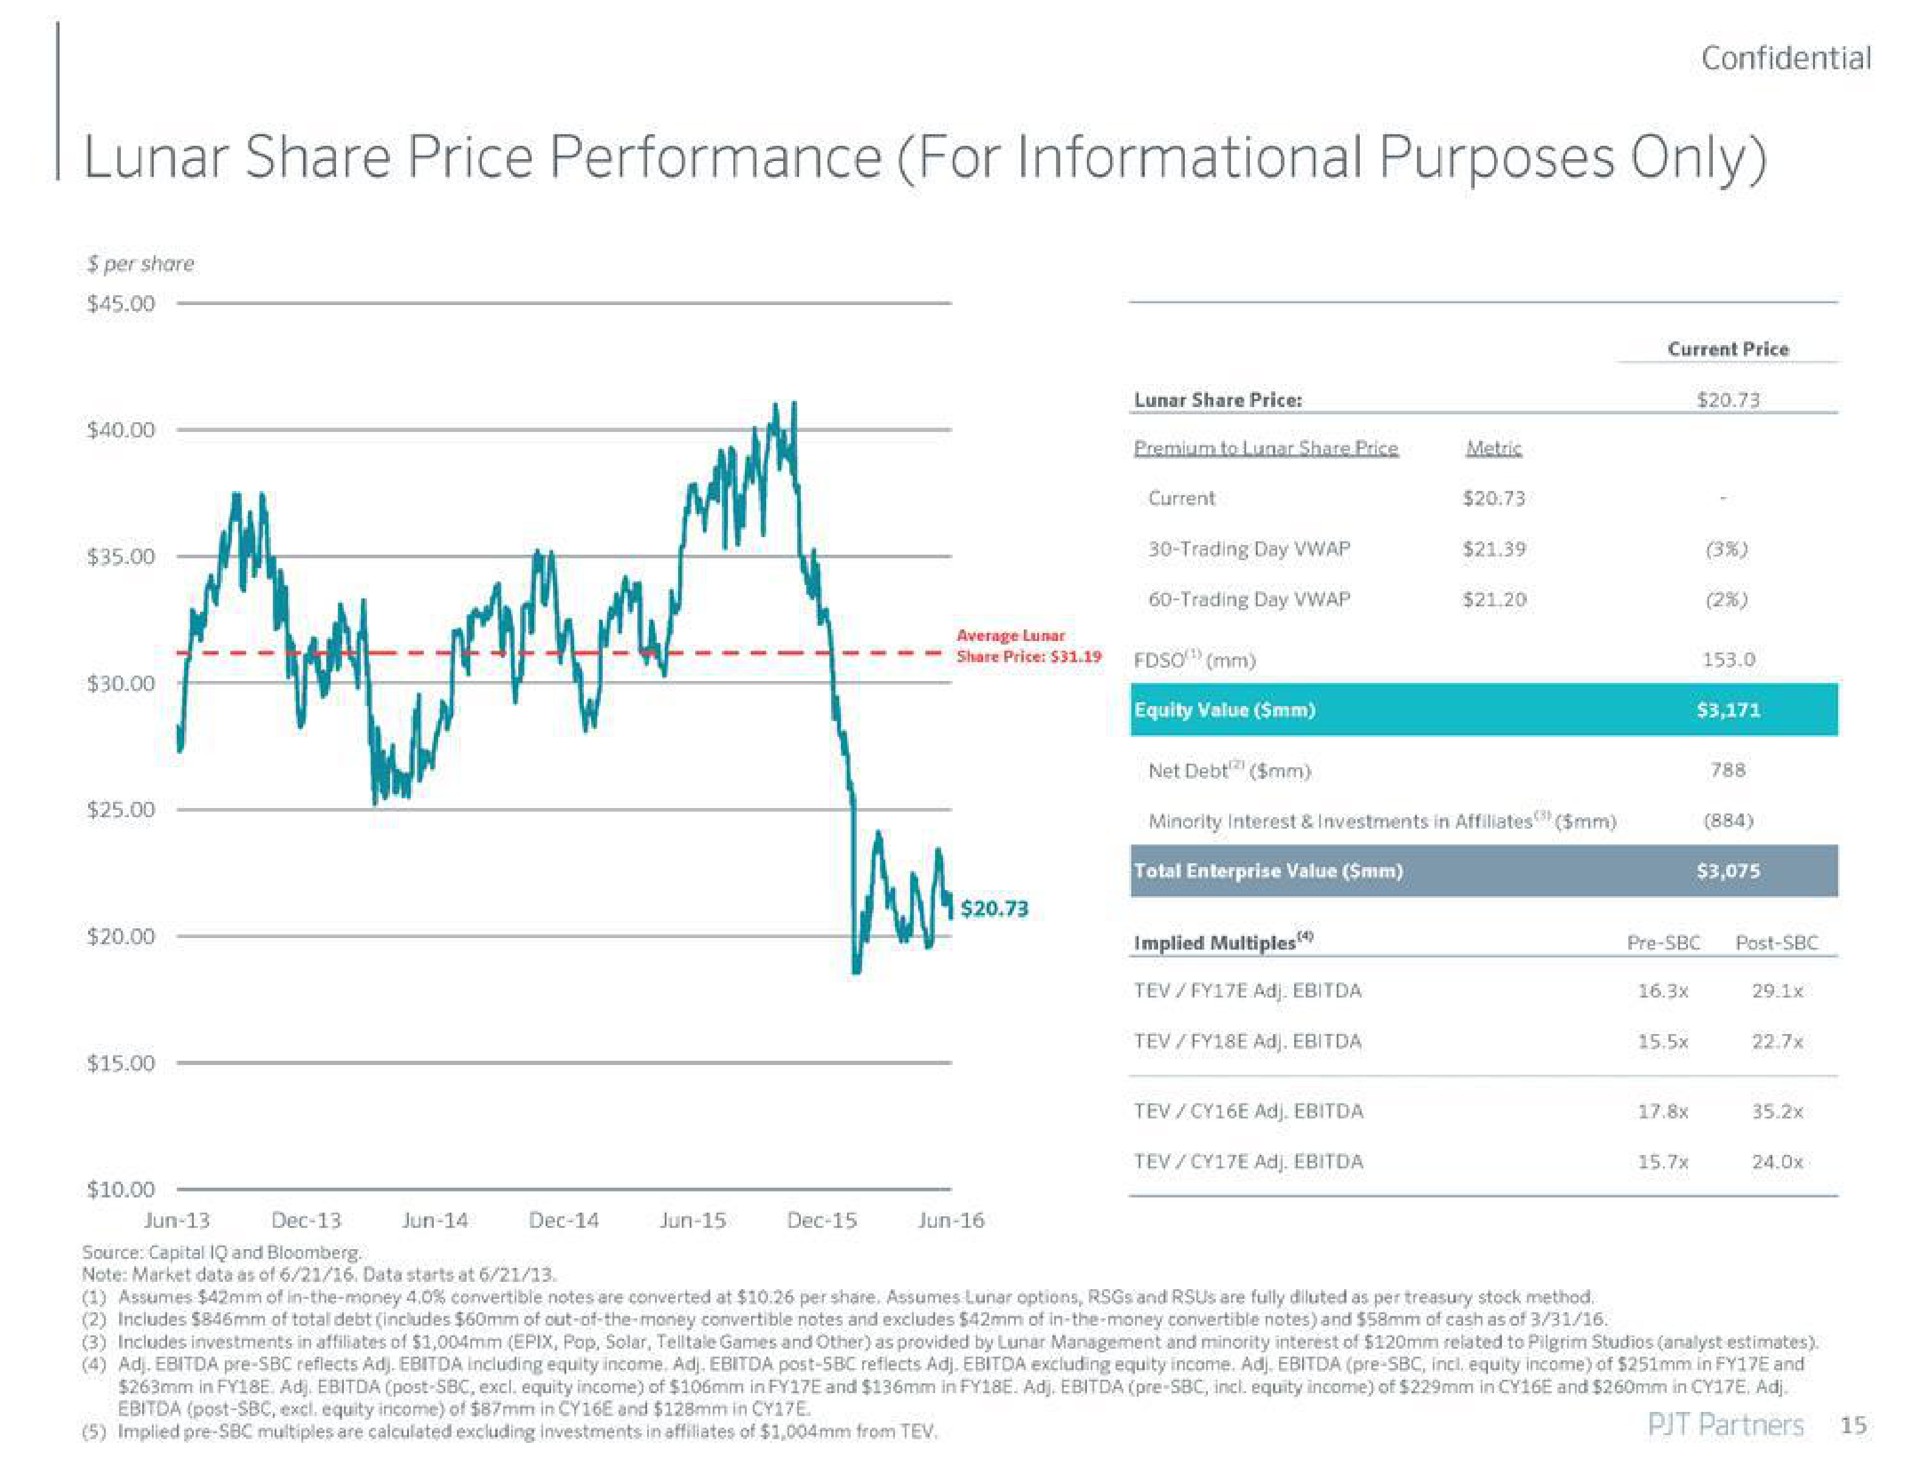 lunar share price performance for informational purposes only | PJT Partners